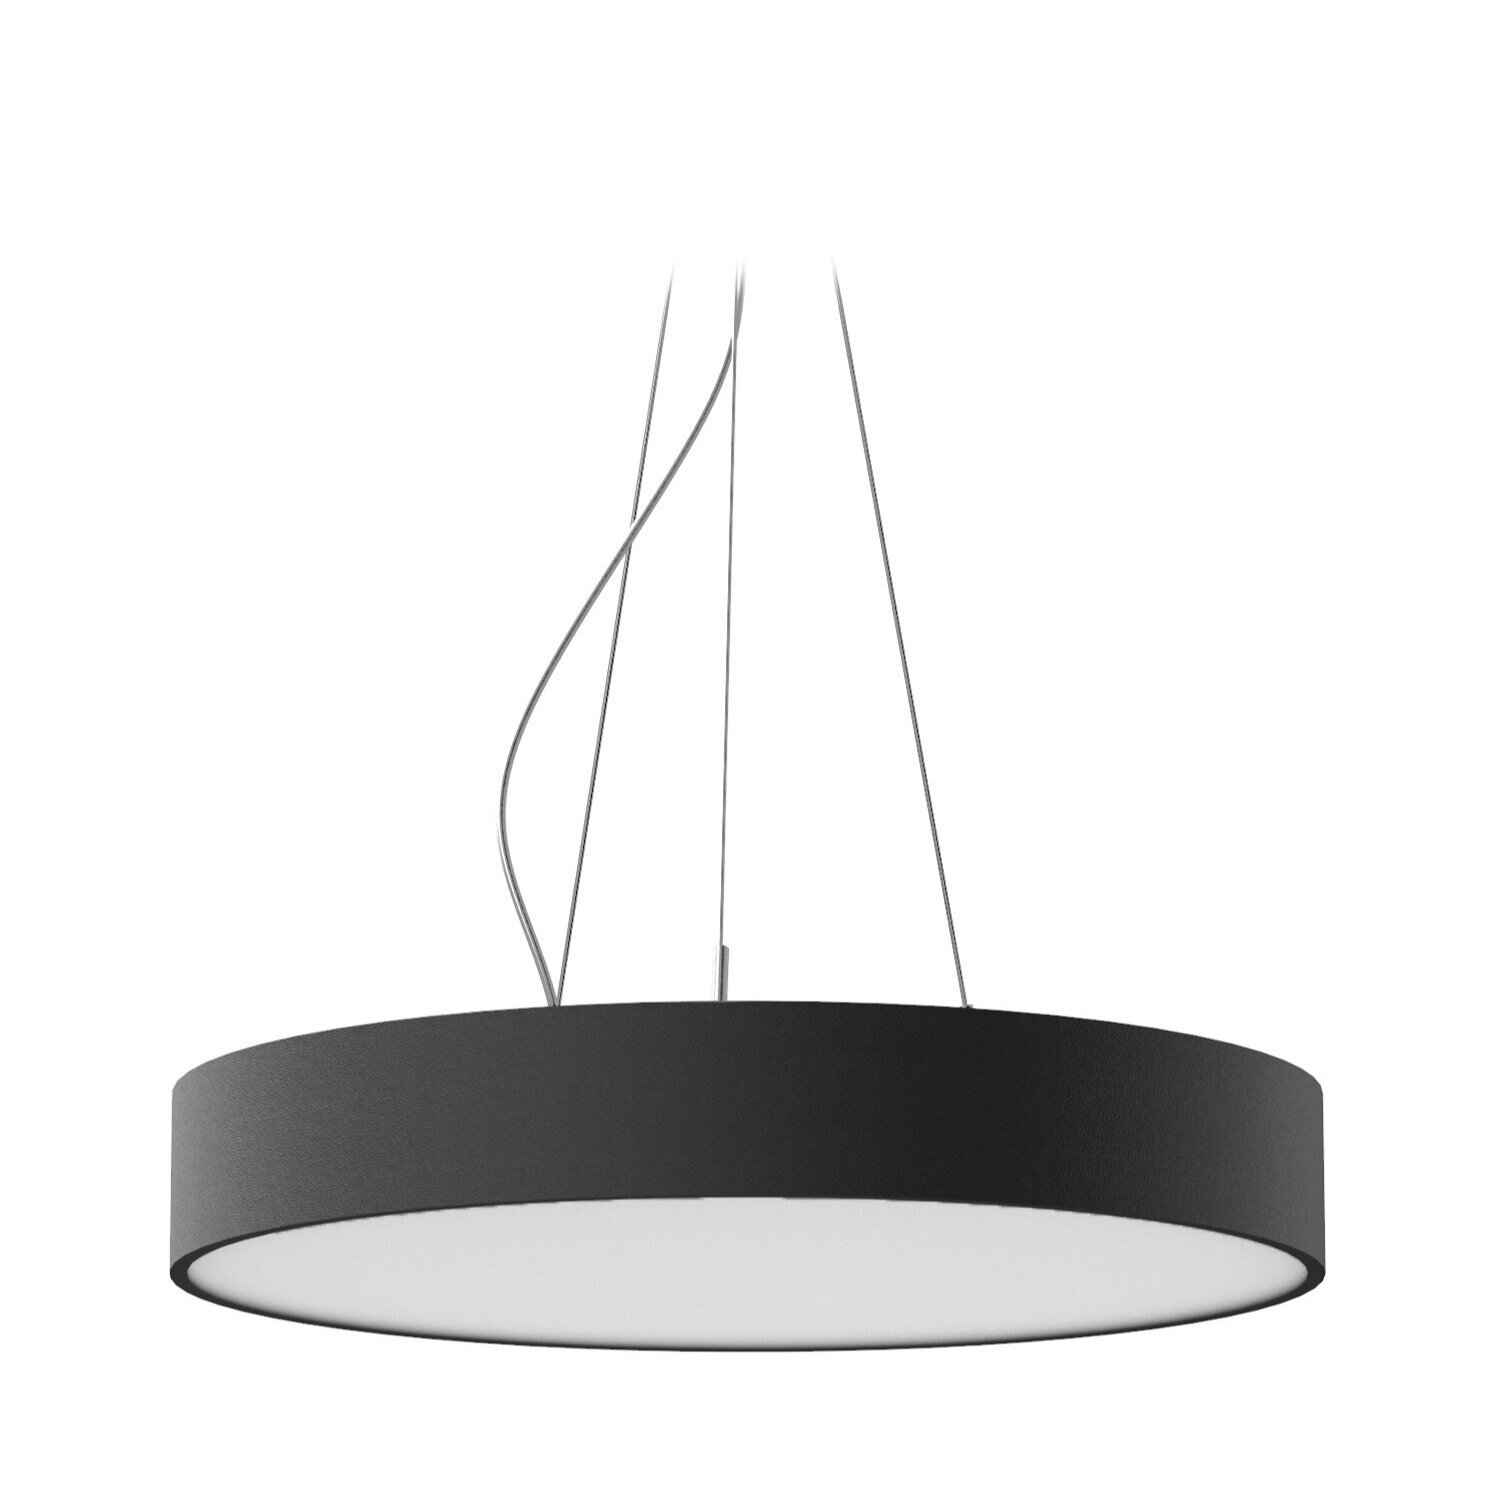 Suspended circular lighting products